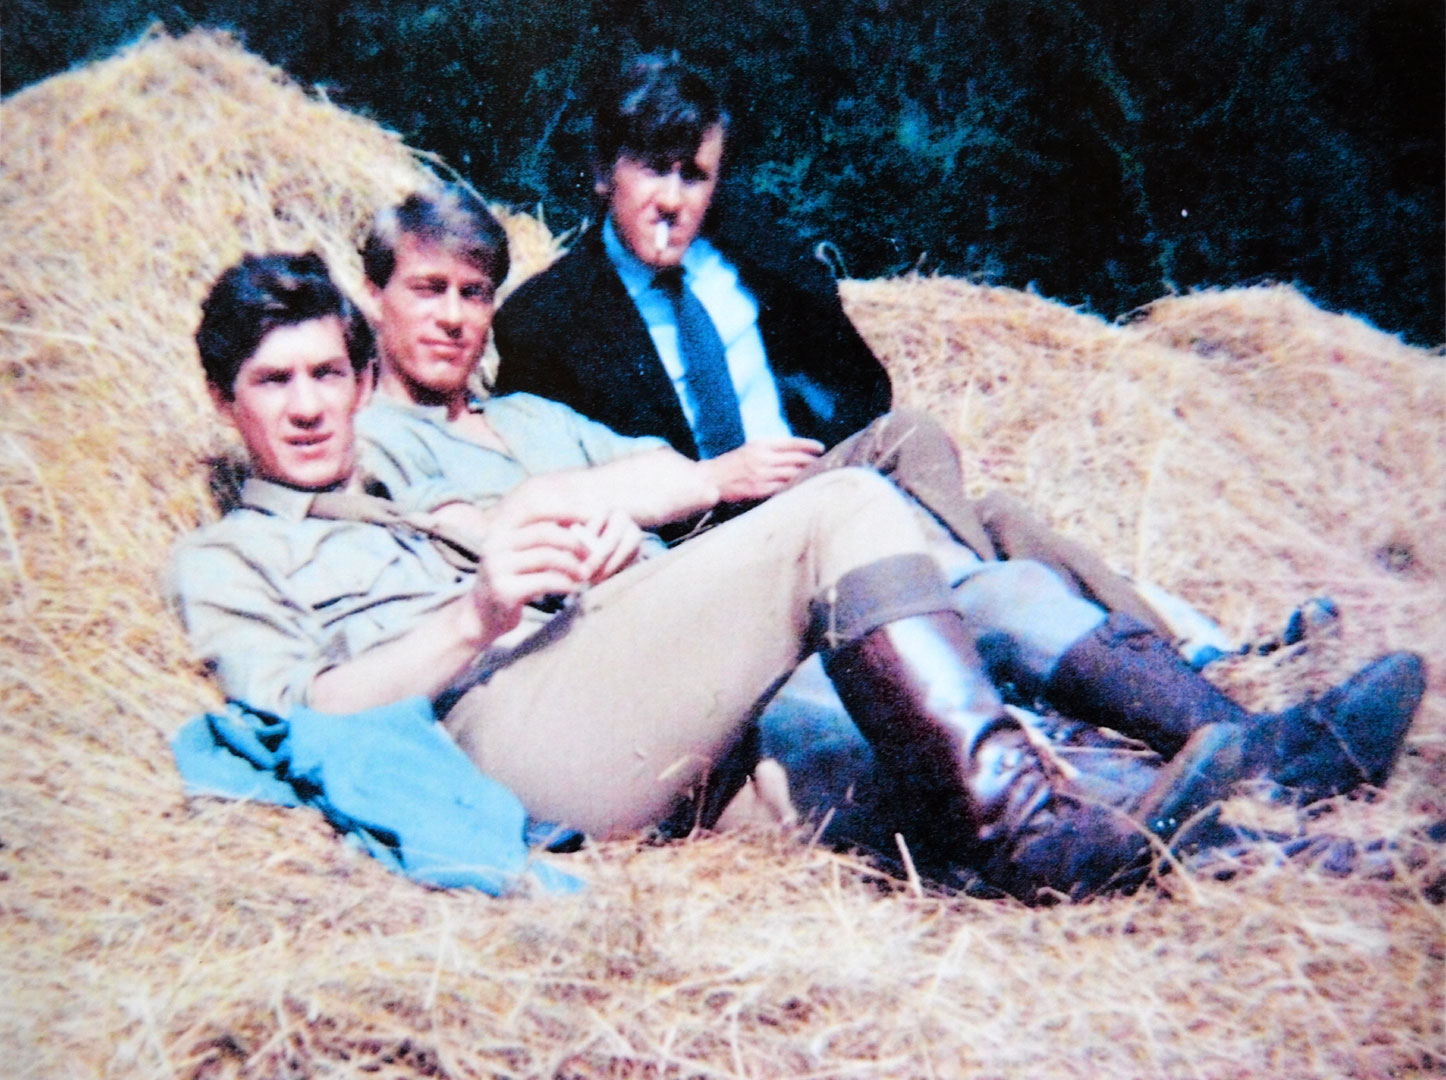 On the set of a film that was never completed, with Burr DeBenning and David Battley